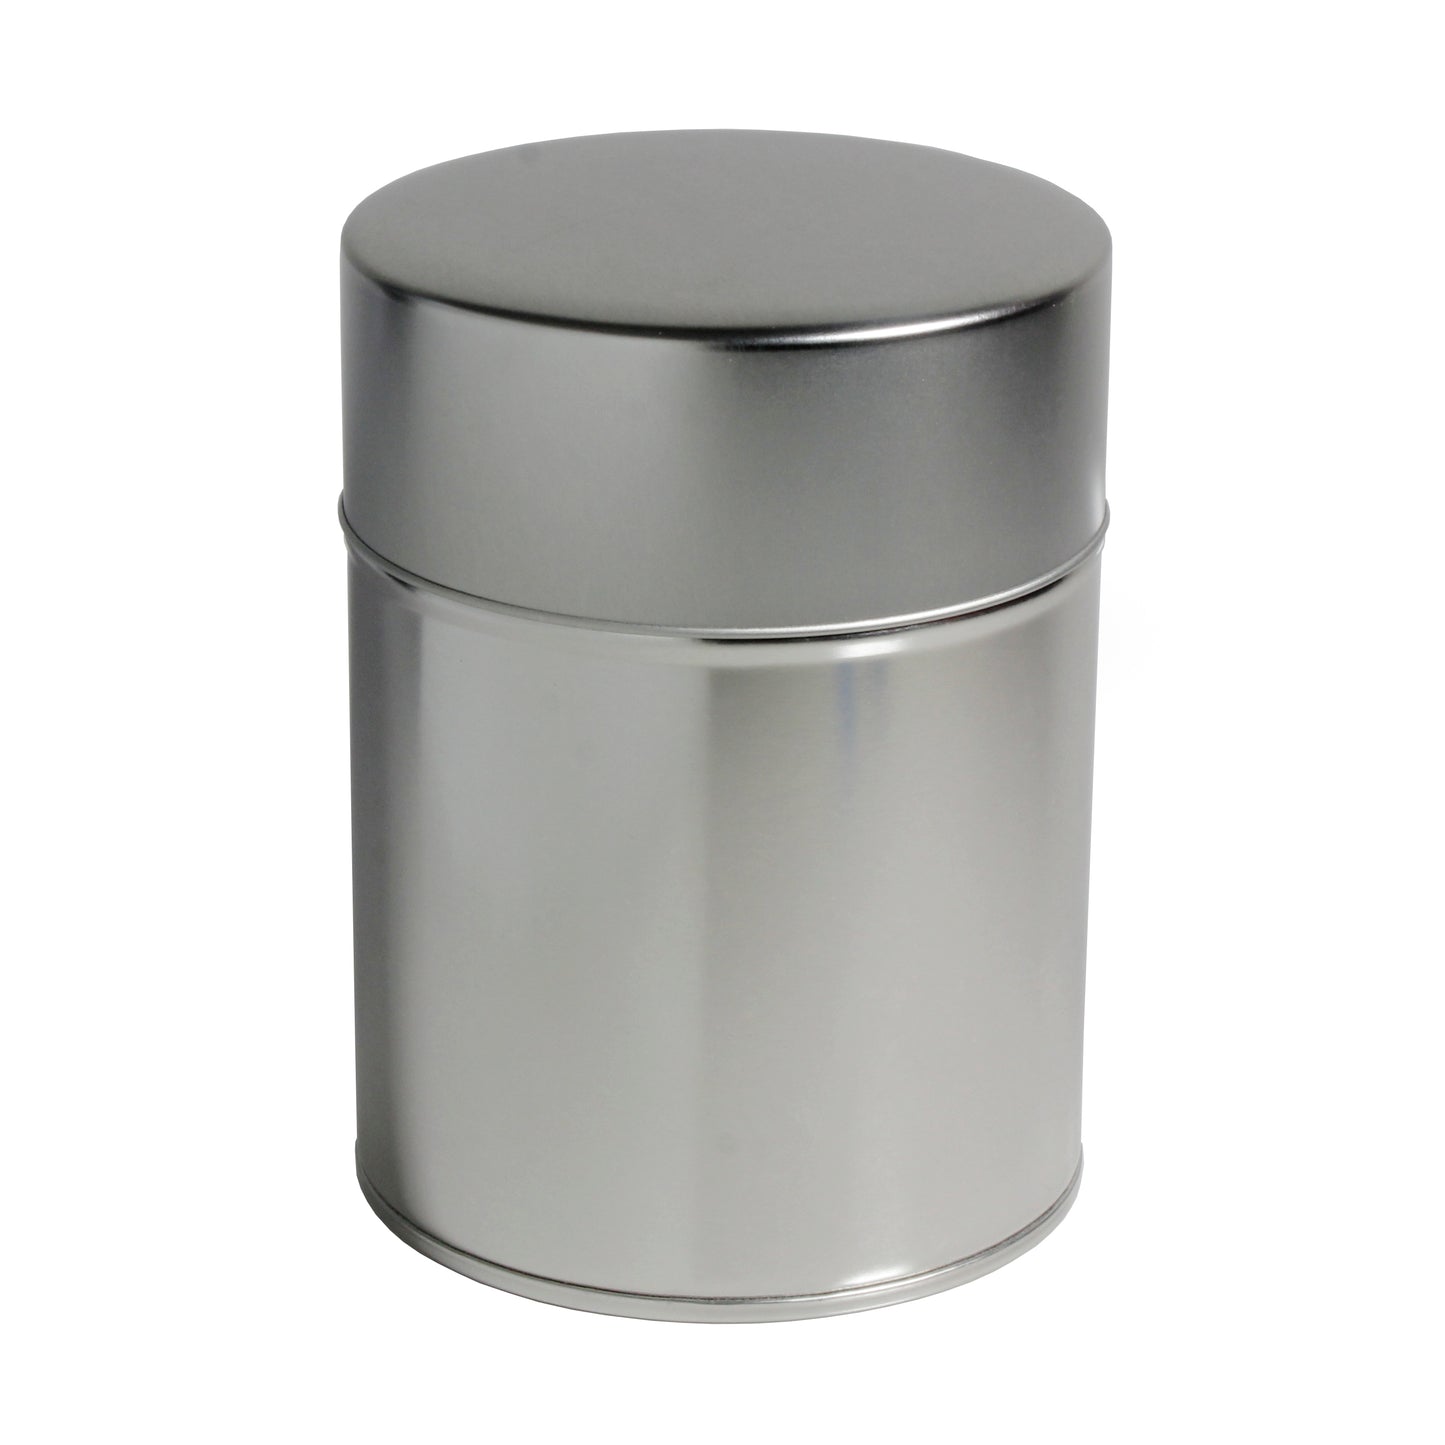 Stainless-Steel Tin for Storage